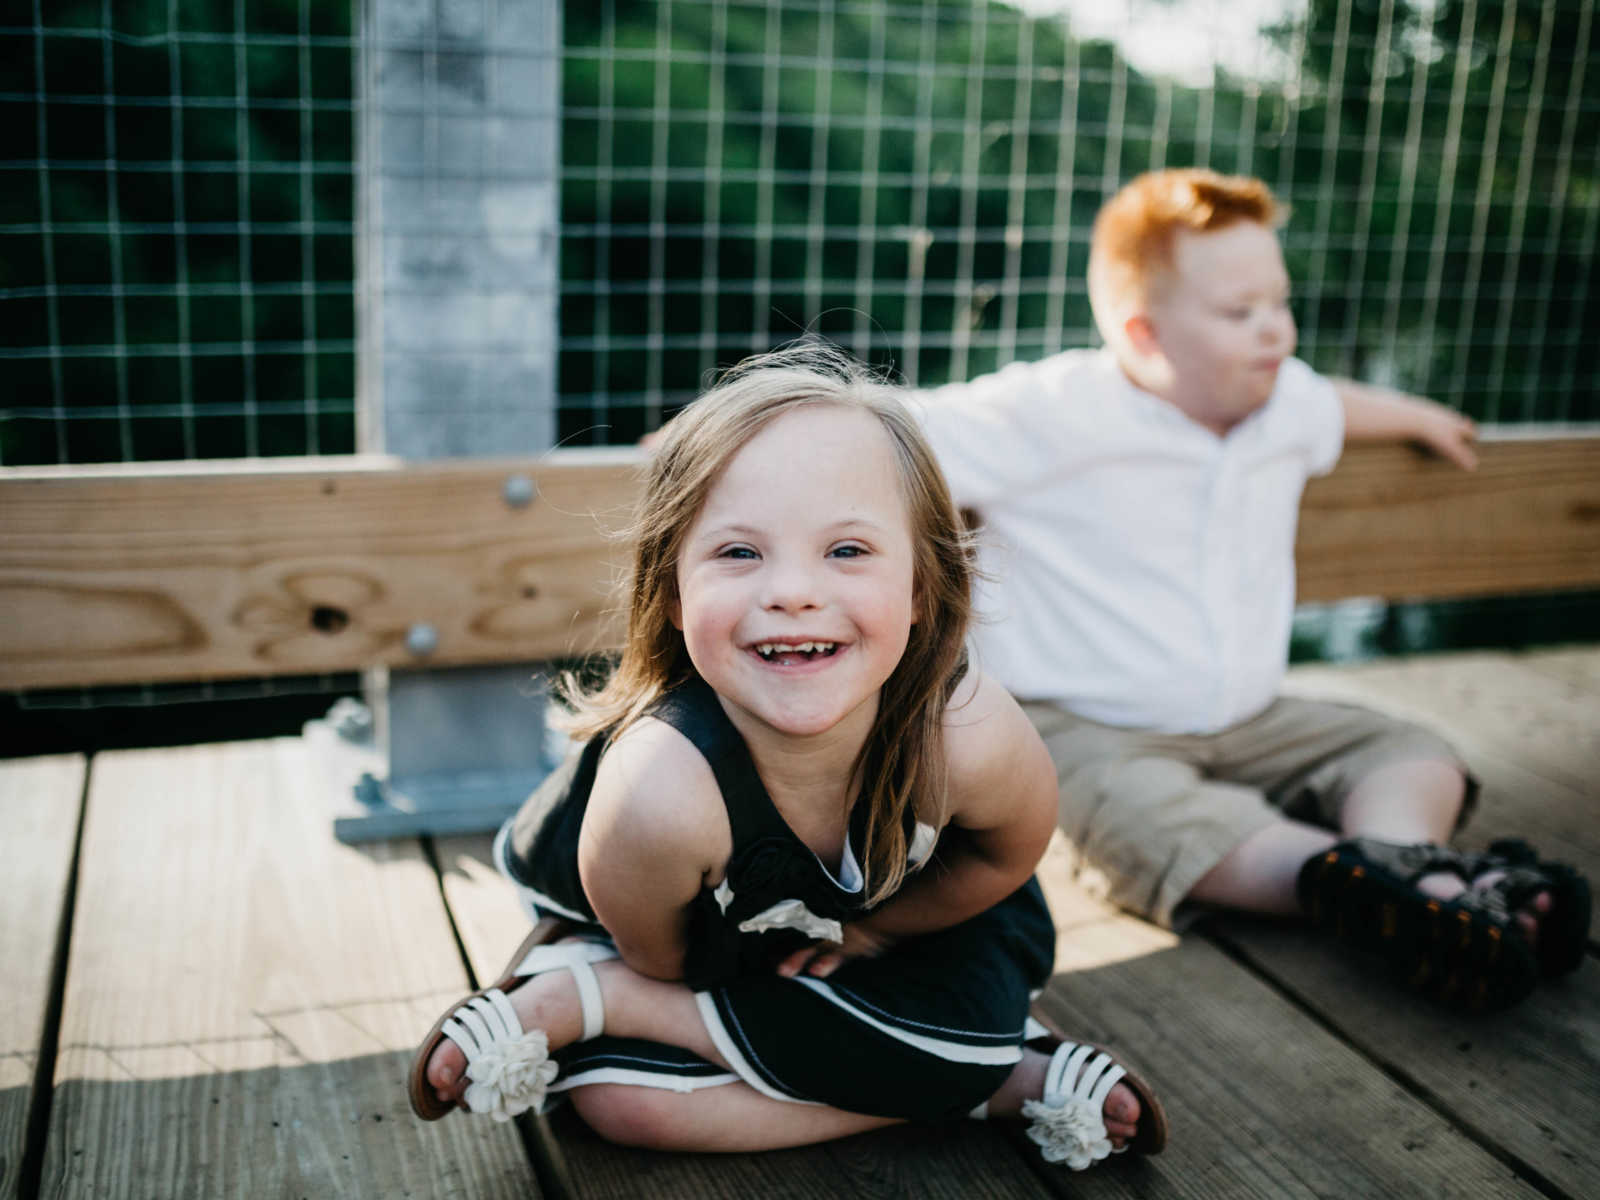 Down syndrome girl smiling while sitting next to down syndrome boy who is leaning on bridge